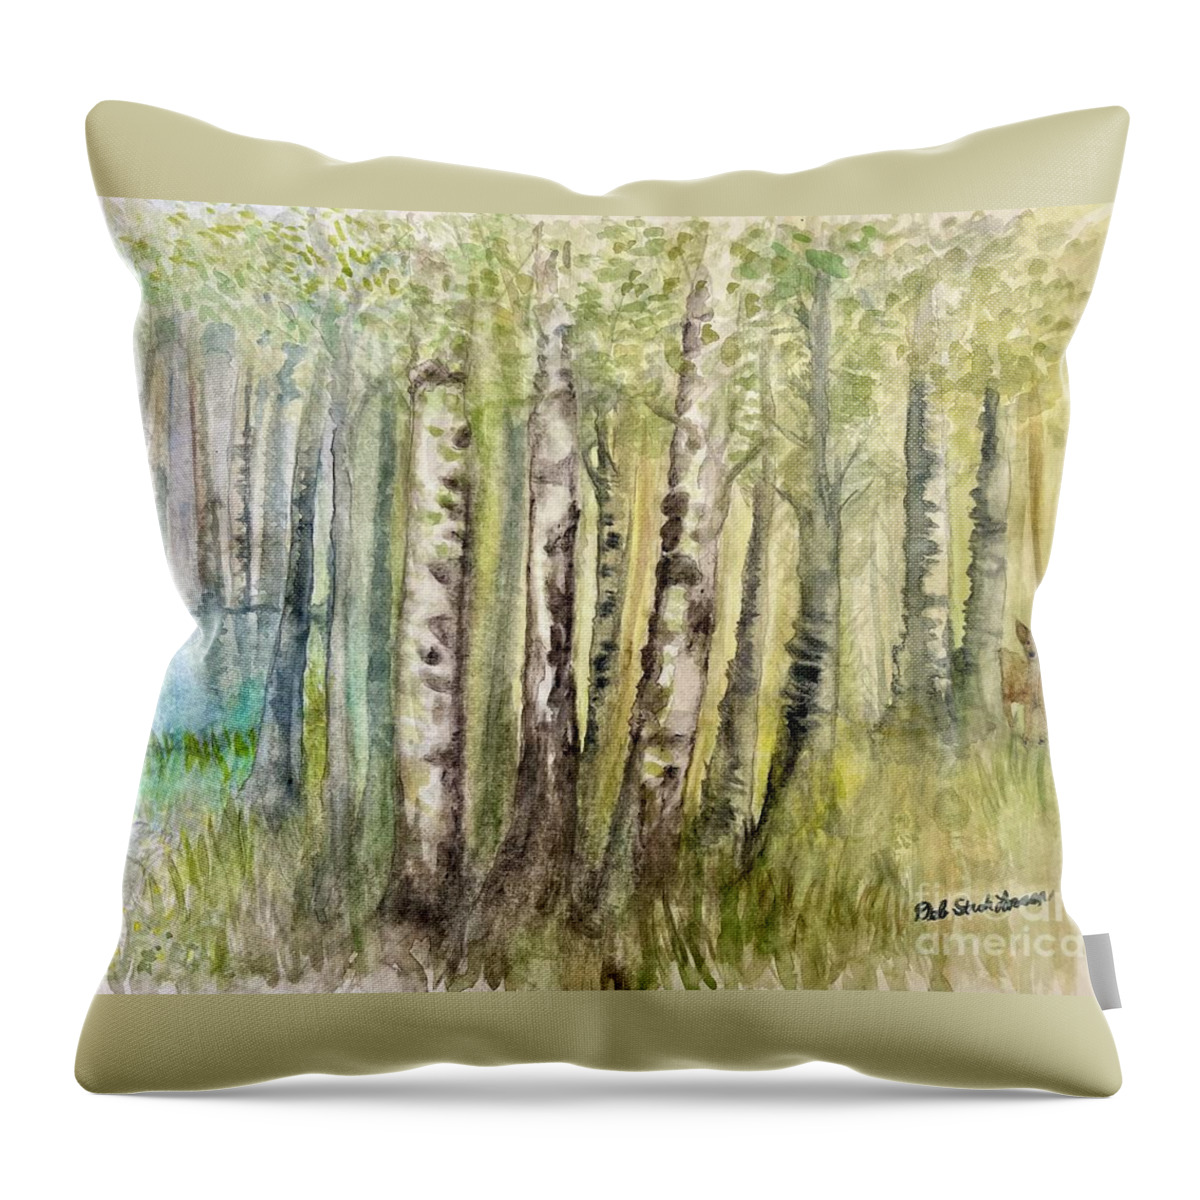 Birch Trees Throw Pillow featuring the painting Birch Forest Visitor by Deb Stroh-Larson